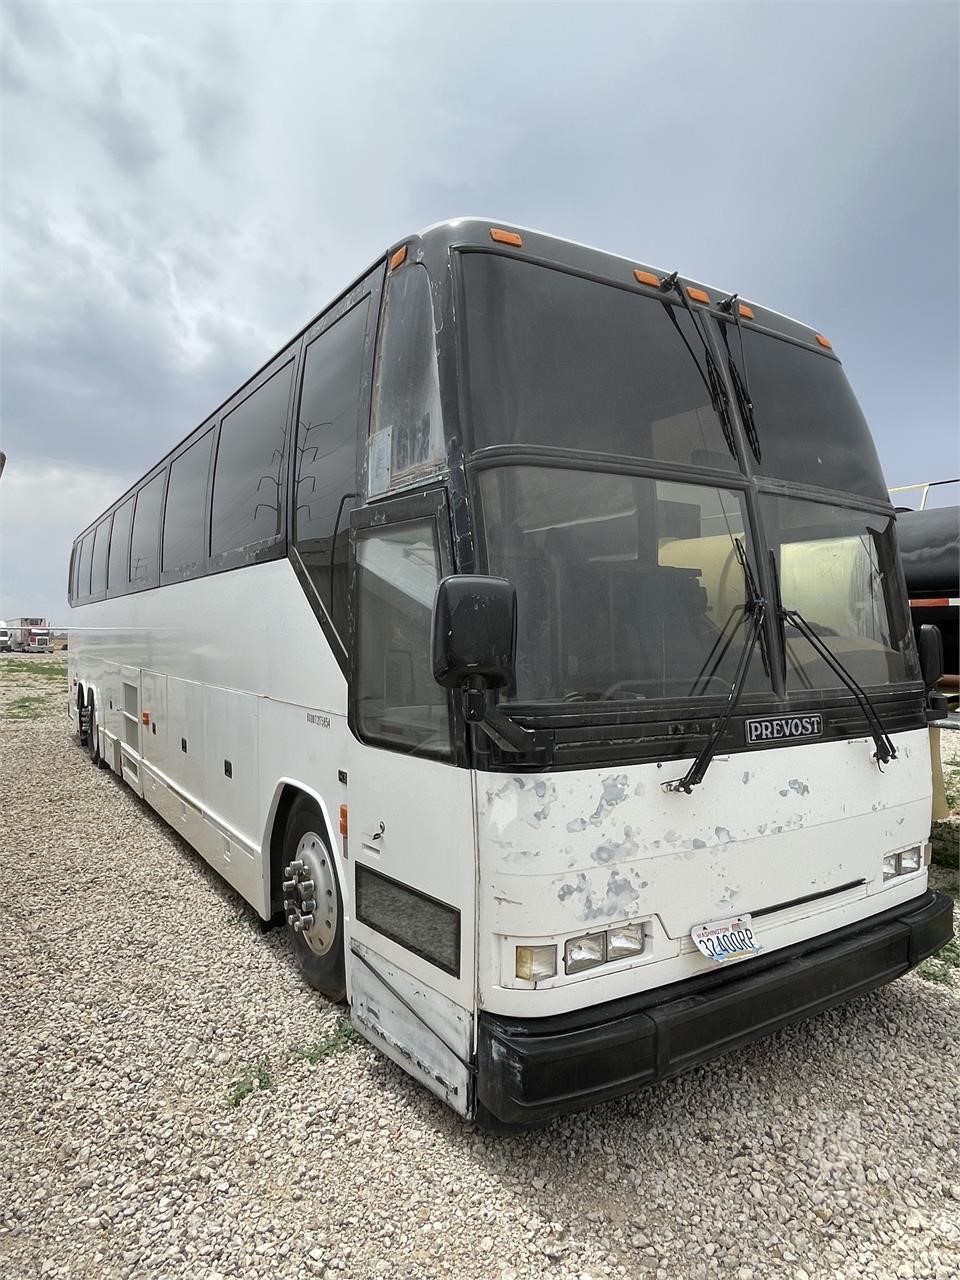 PREVOST Passenger Bus Auction Results - 35 Listings  - Page  1 of 2